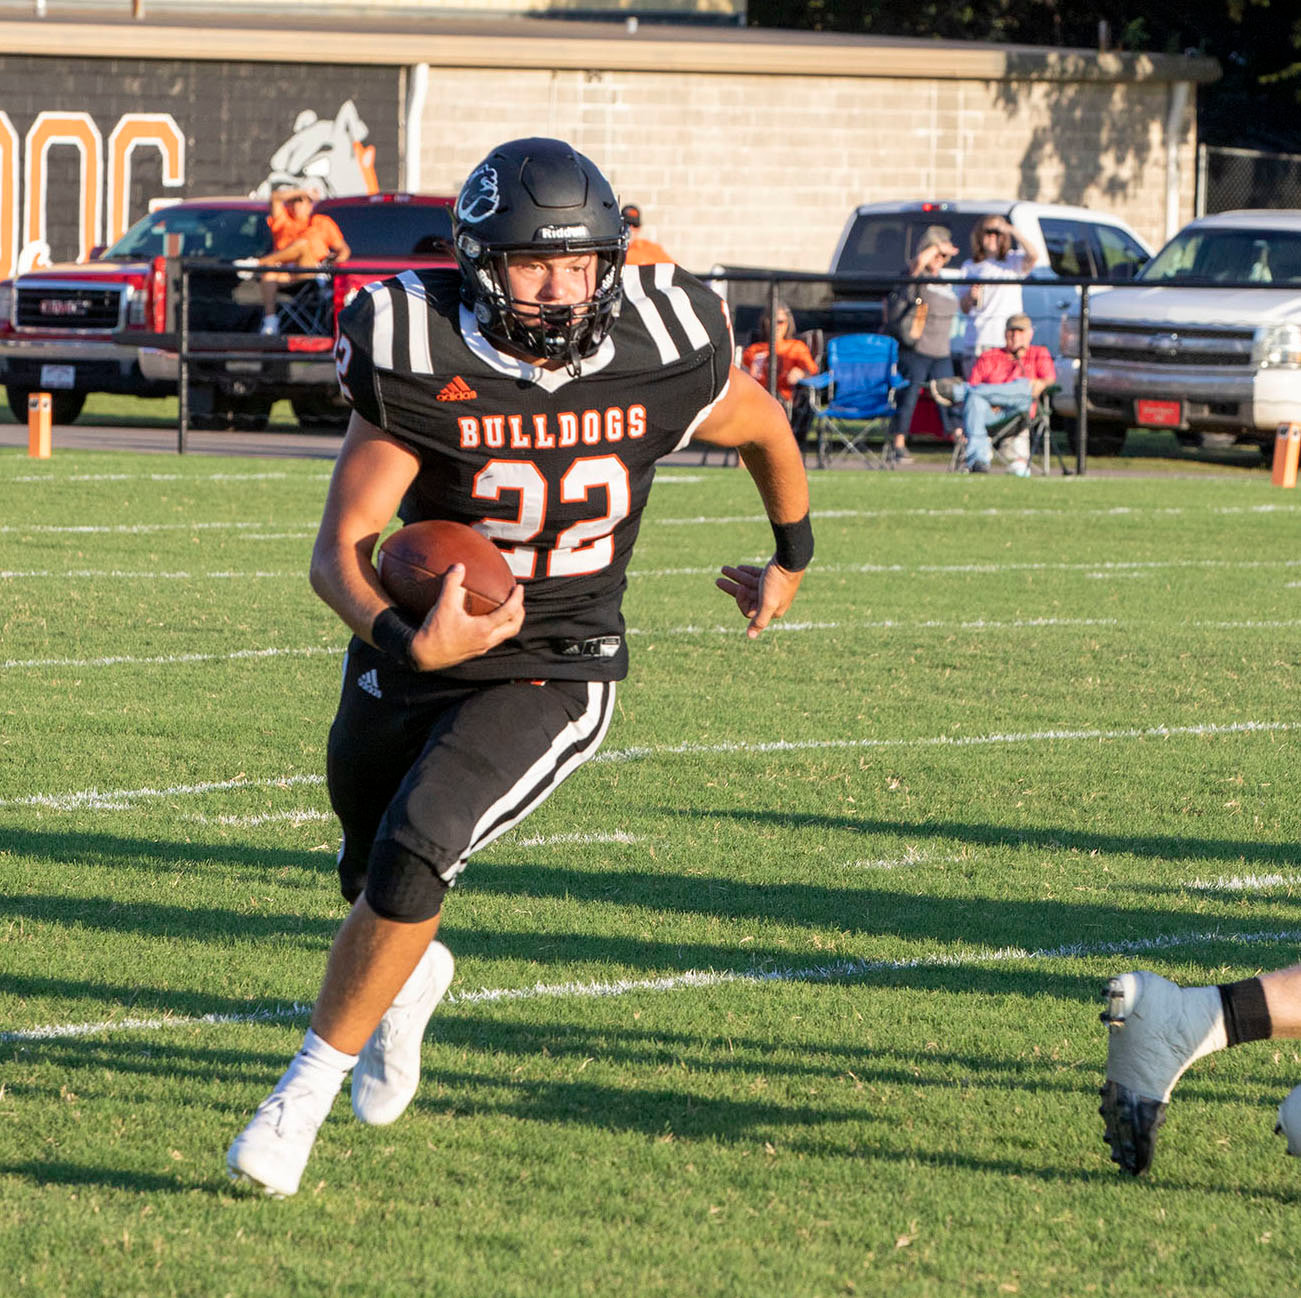 Wayne senior Brannon Lewelling runs with the ball at D.S. Zack Powell Stadium. Lewelling rushed for 86 yards on eight carries in Wayne’s 48-16 win over Walters Friday night.